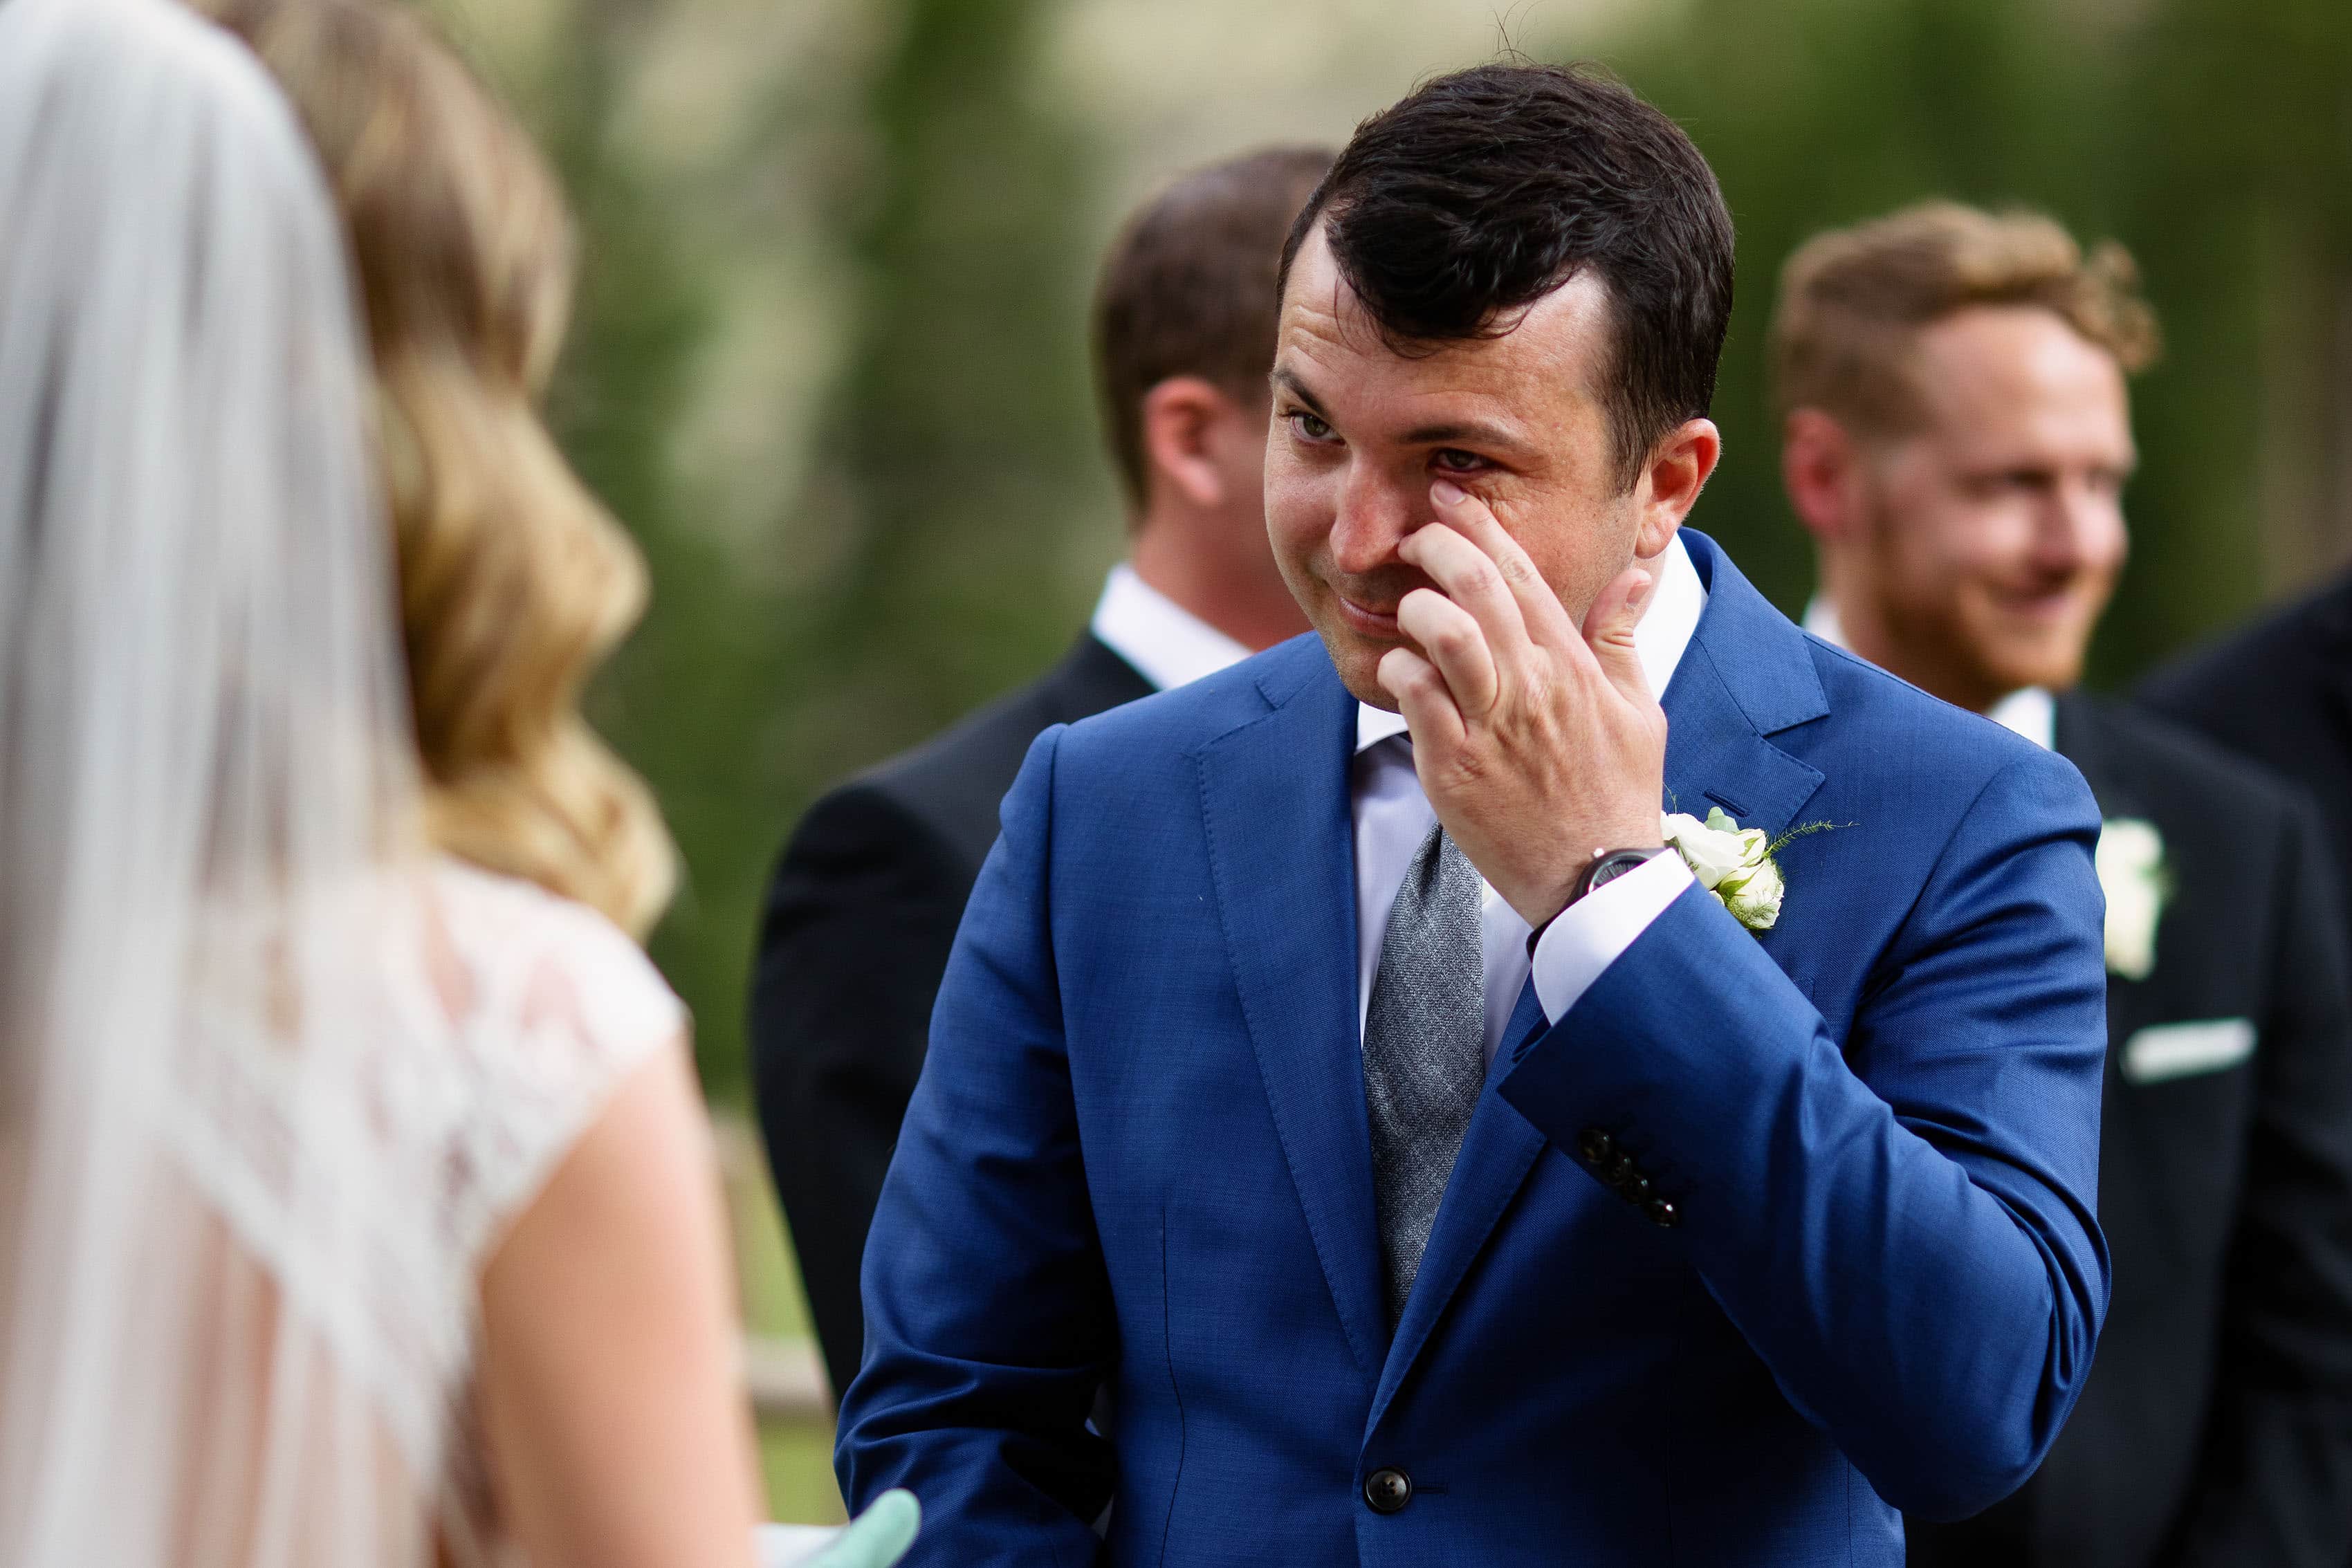 The groom wipes away a tear during the ceremony